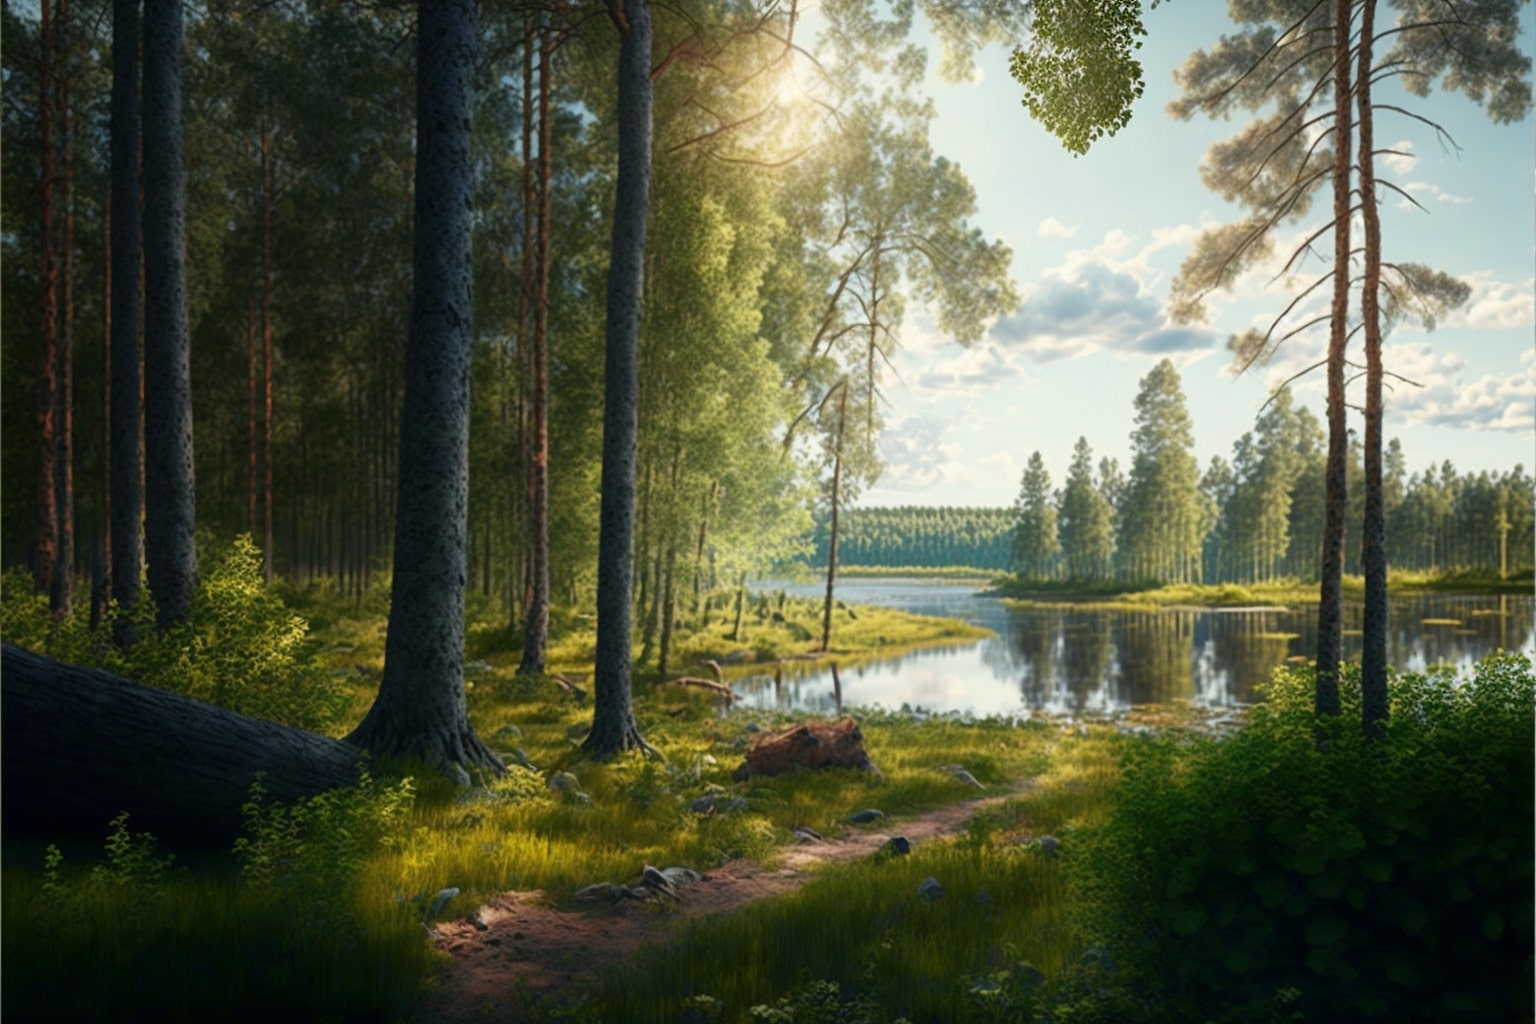 Painting of a forest scene with a lake.